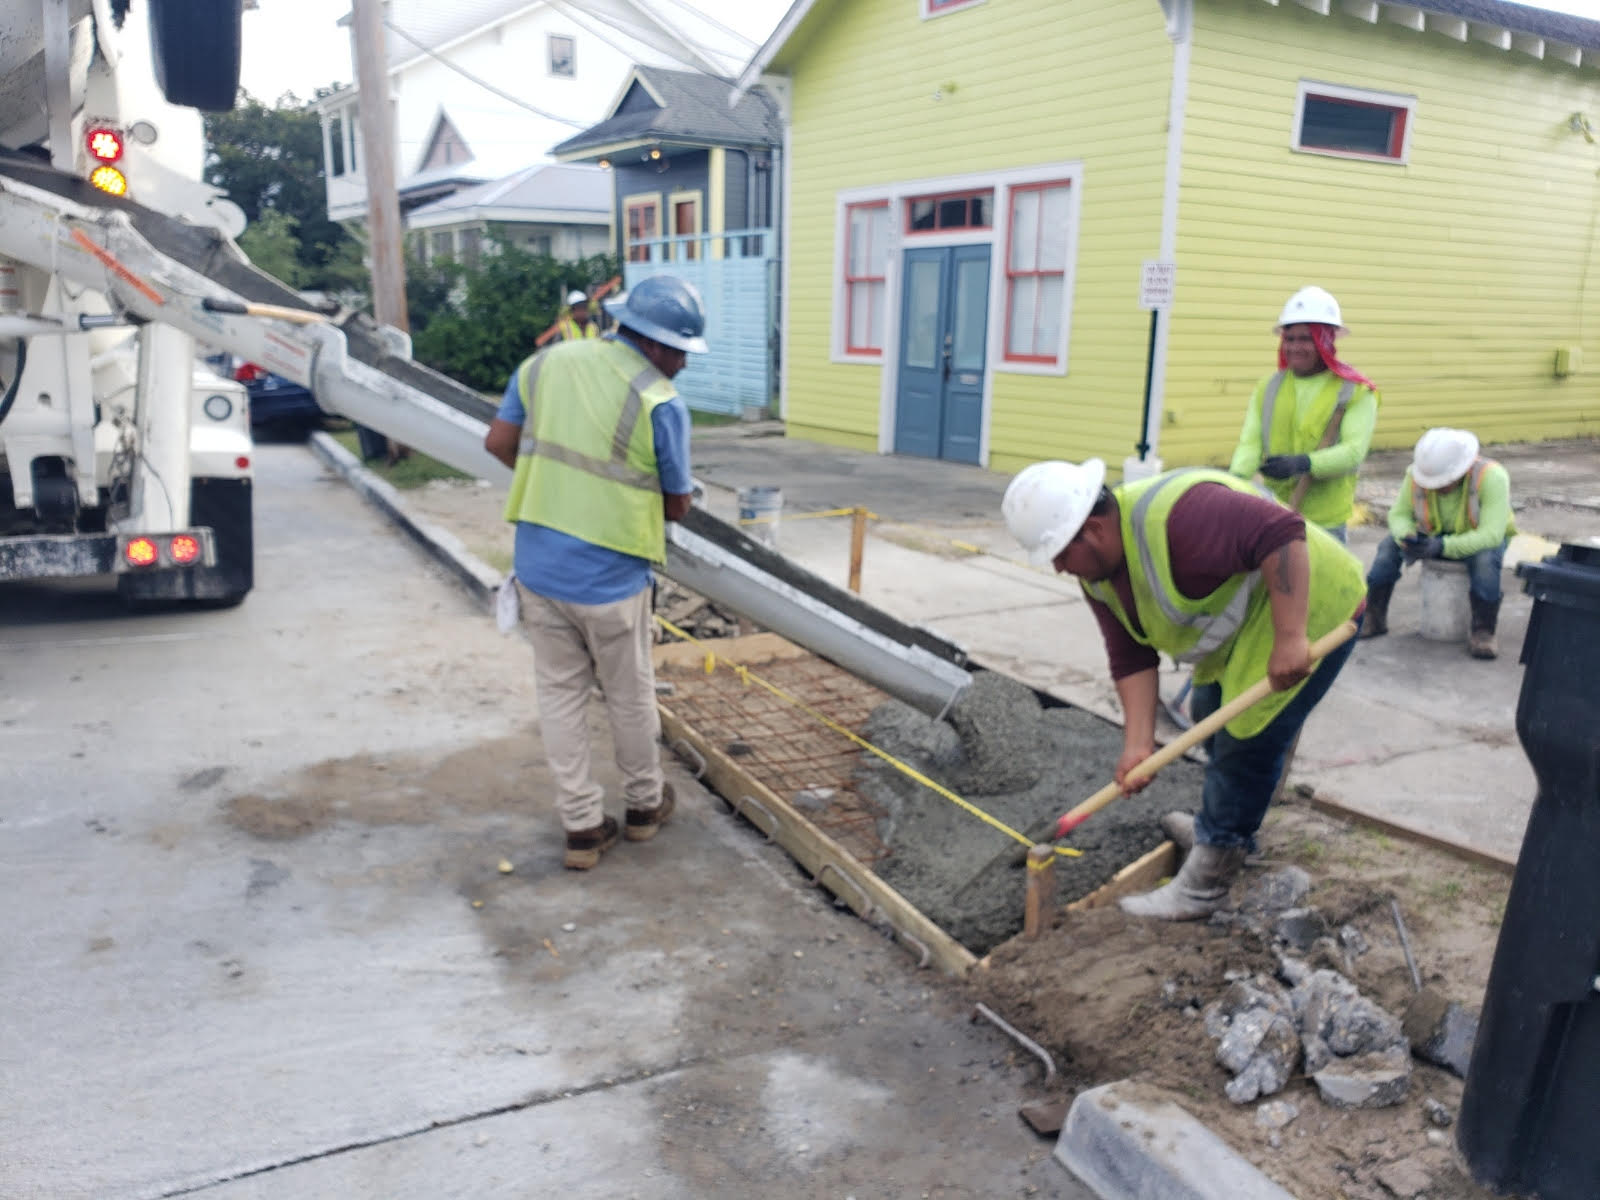 PROGRESS CONTINUES ON THE FRERET GROUP A PROJECT